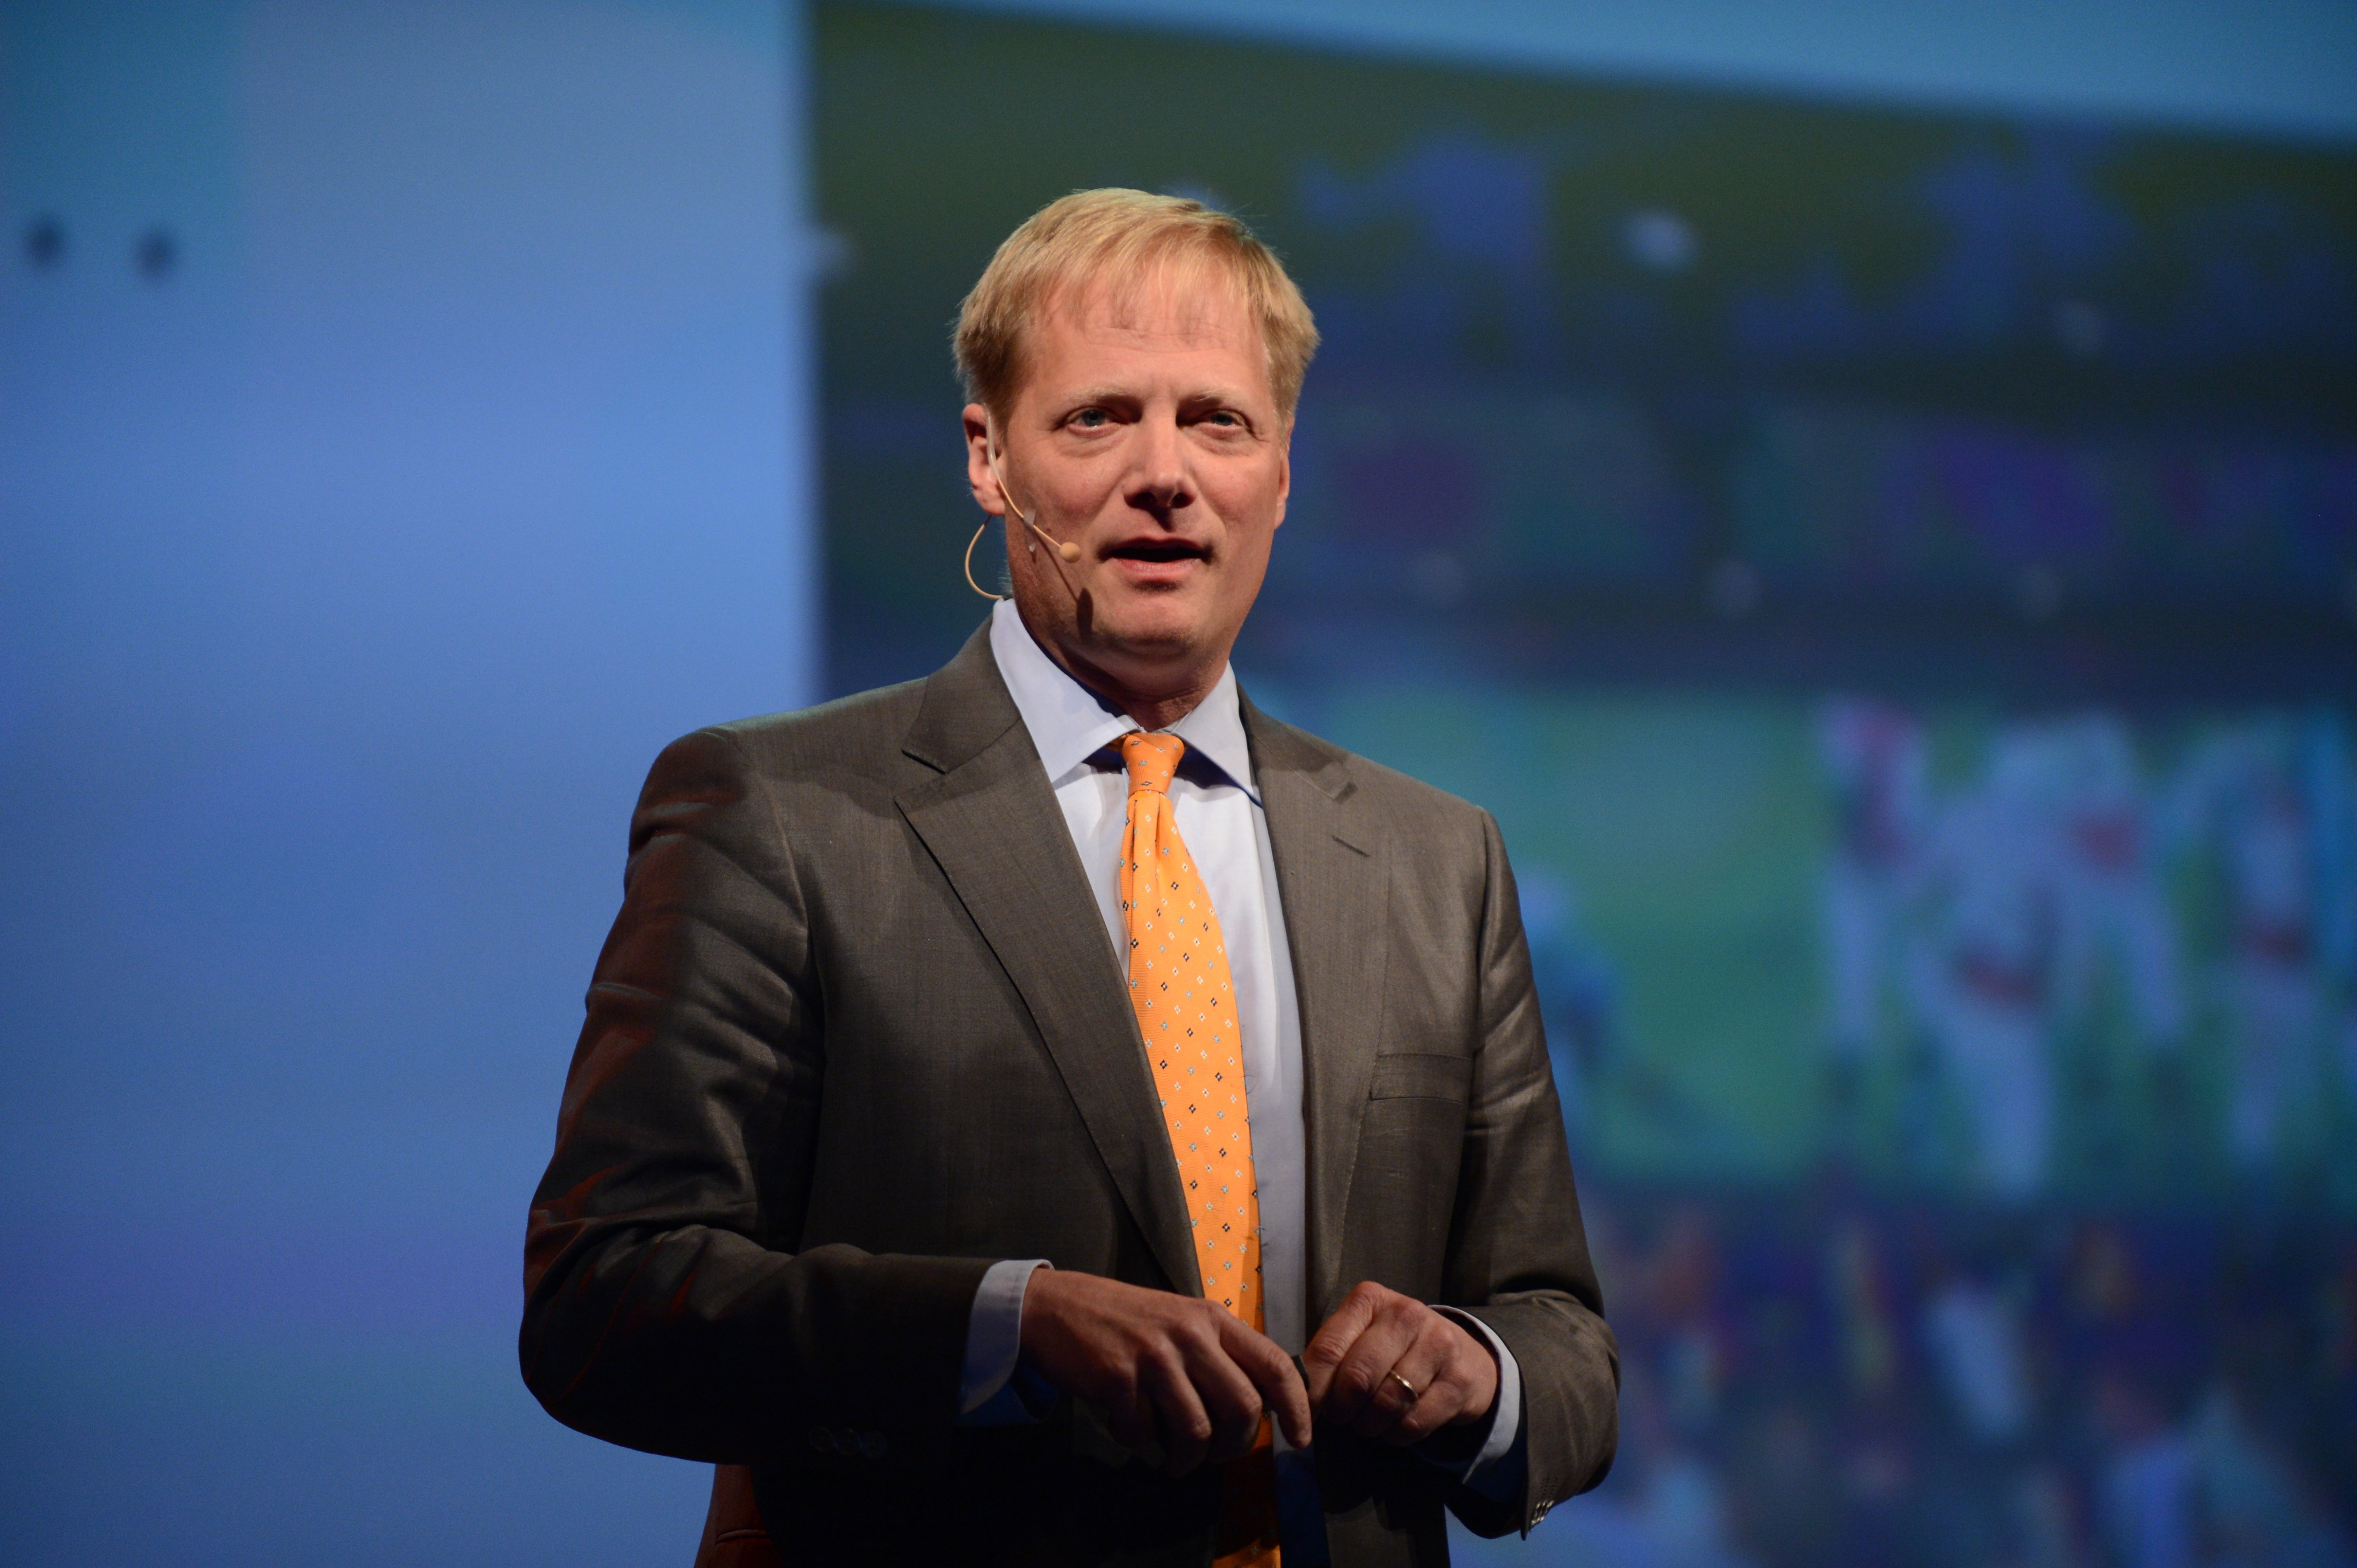 Brian Wansink during at the Discovery Vitality Summit on August 15, 2013 in Johannsburg, South Africa. (Gallo Images&mdash;Getty Images)